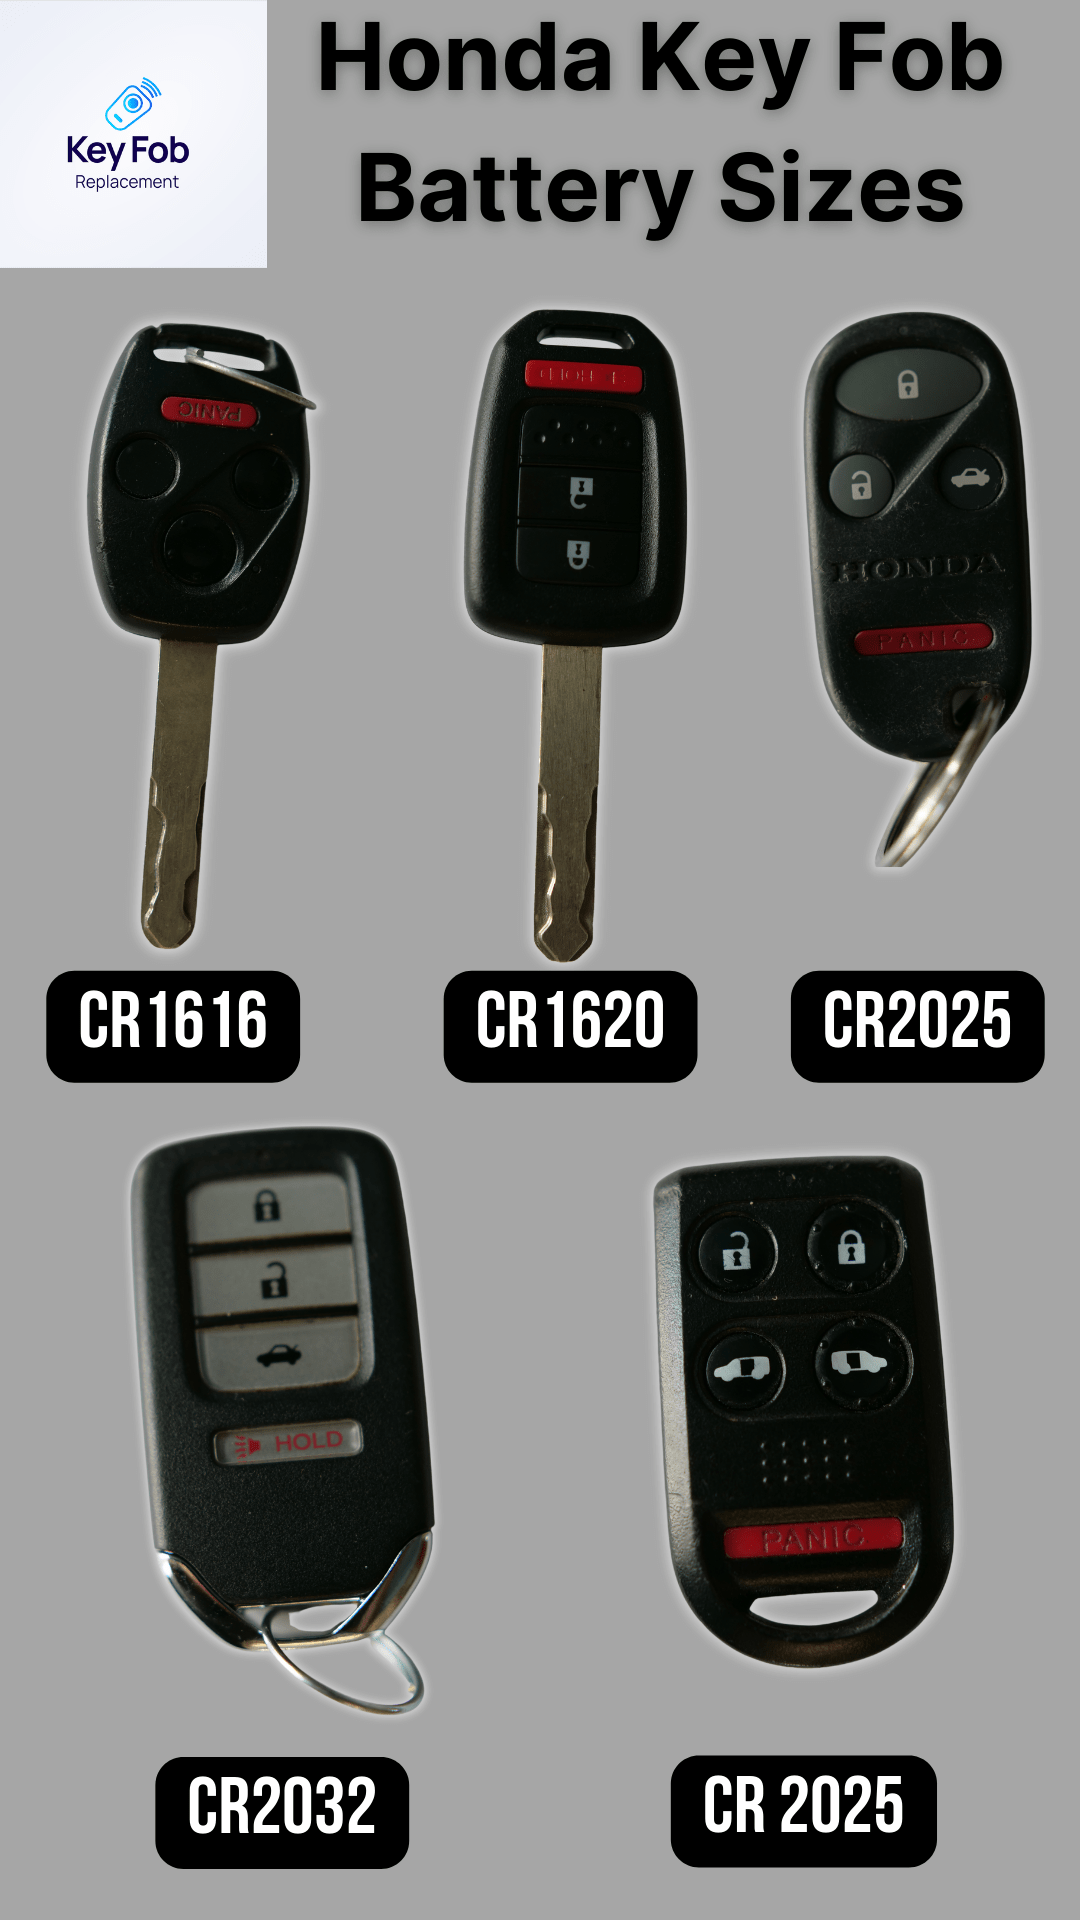 every major Honda key fob and battery replacement size